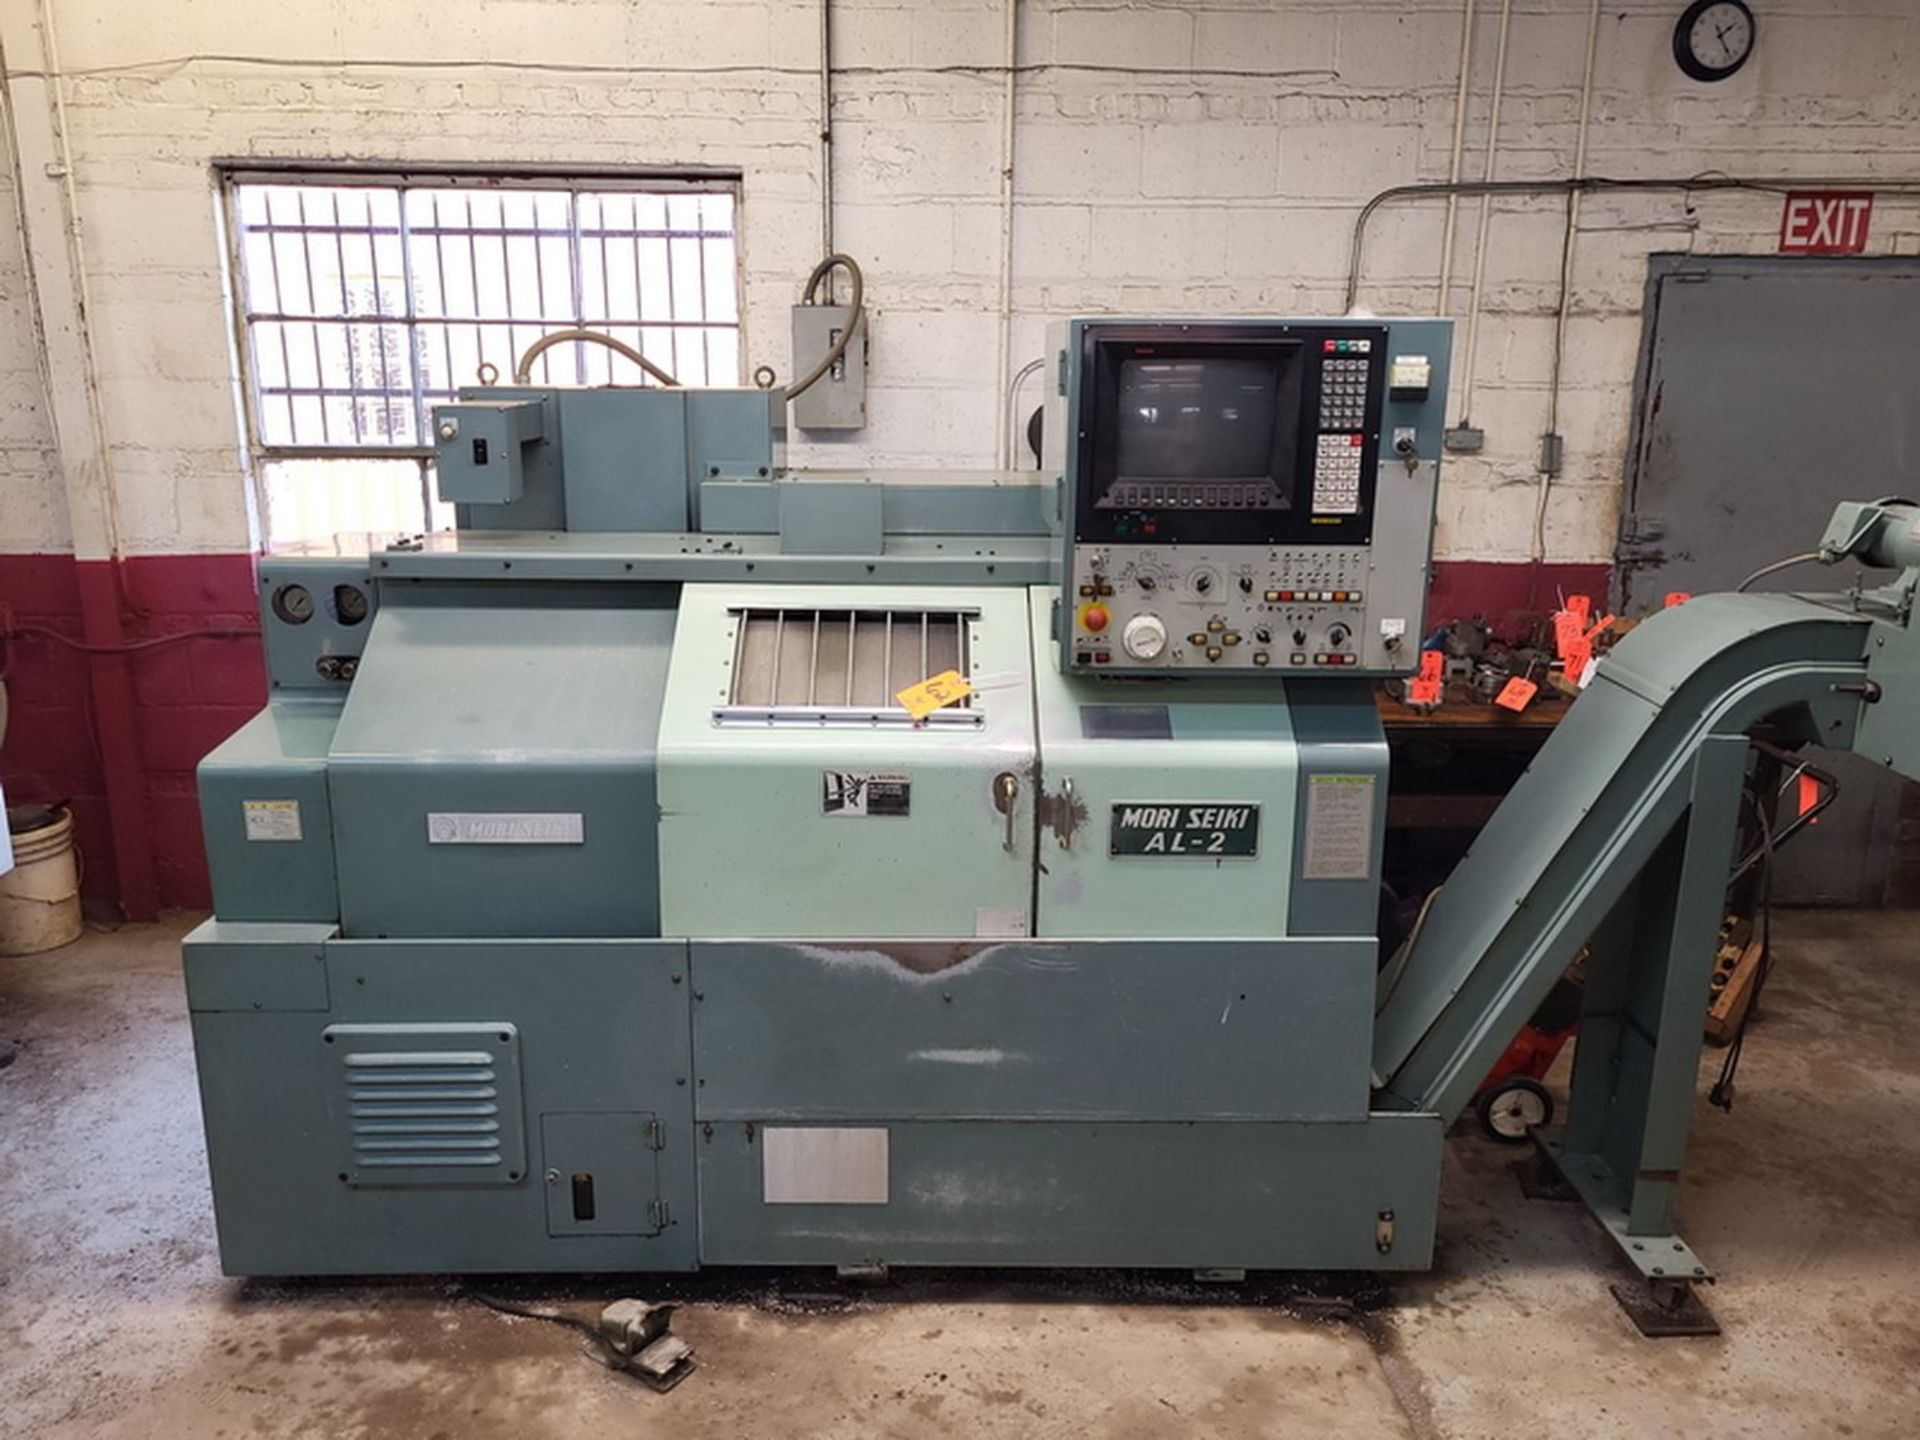 Mori Seiki Model AL-2ATM CNC Lathe, S/N: 937; with 8-Position Turret, Collet Chuck, Tool Setter, - Image 2 of 13